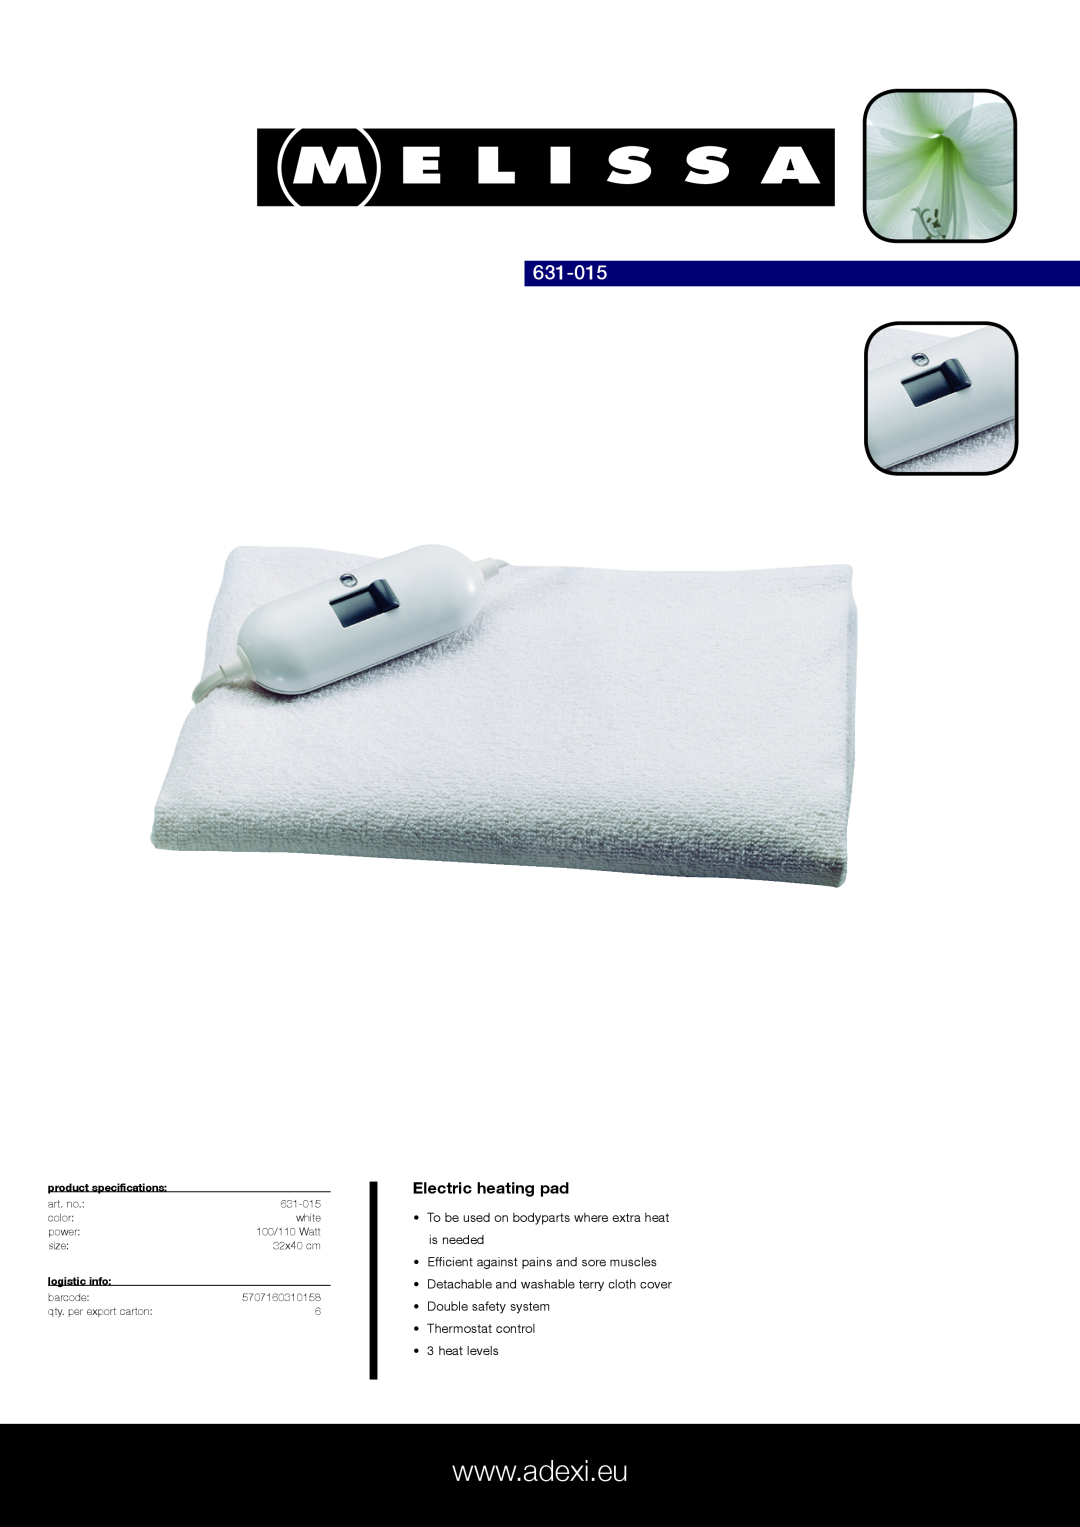 Melissa 631-015 specifications Electric heating pad, Efficient against pains and sore muscles, heat levels, logistic info 